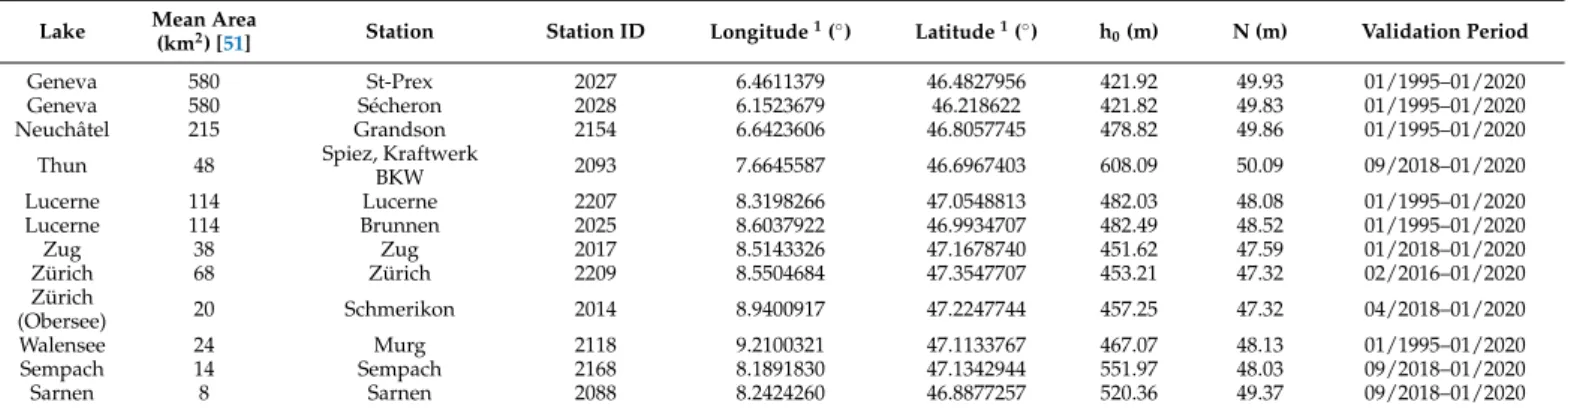 Table 4. Information related to the in situ gauge stations used in this study: lake, station name and FOEN ID, geographical location, base level elevation, and geoid height from CHGeo2004 geoid model.